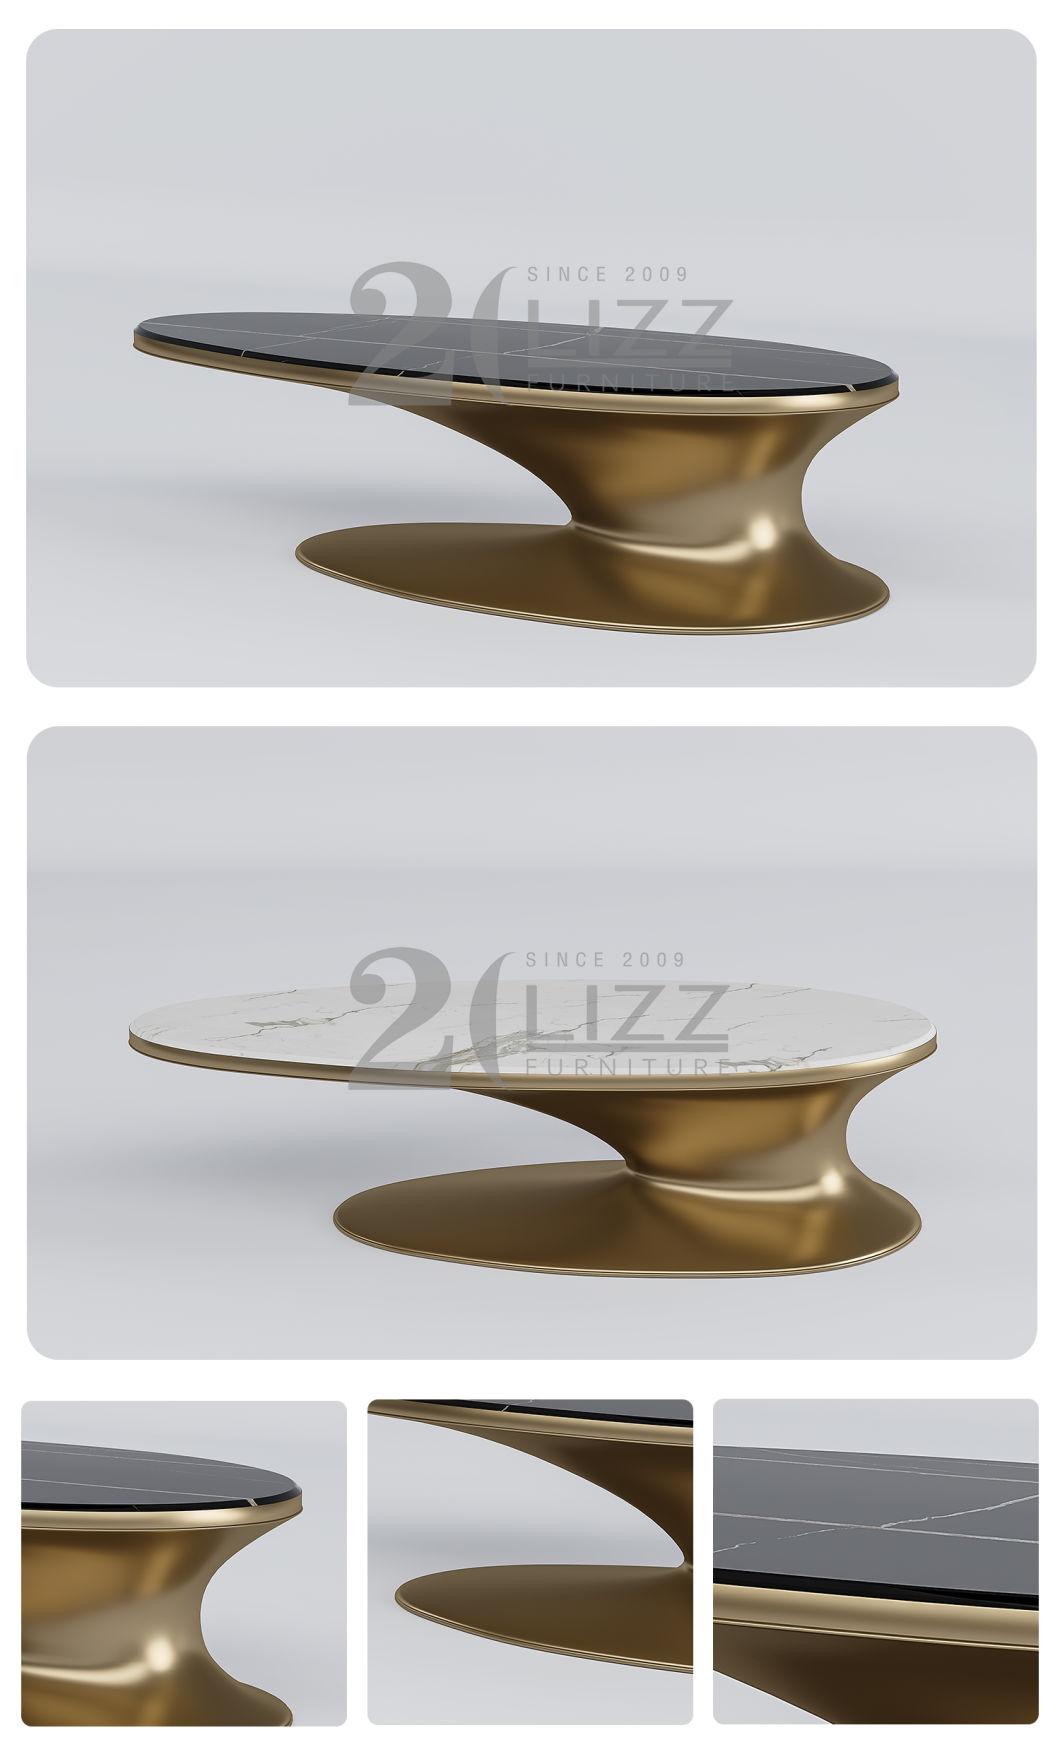 Classic Italian Design Living Room Furniture Luxury Gold Stainless Steel Black Marble Top Coffee Table